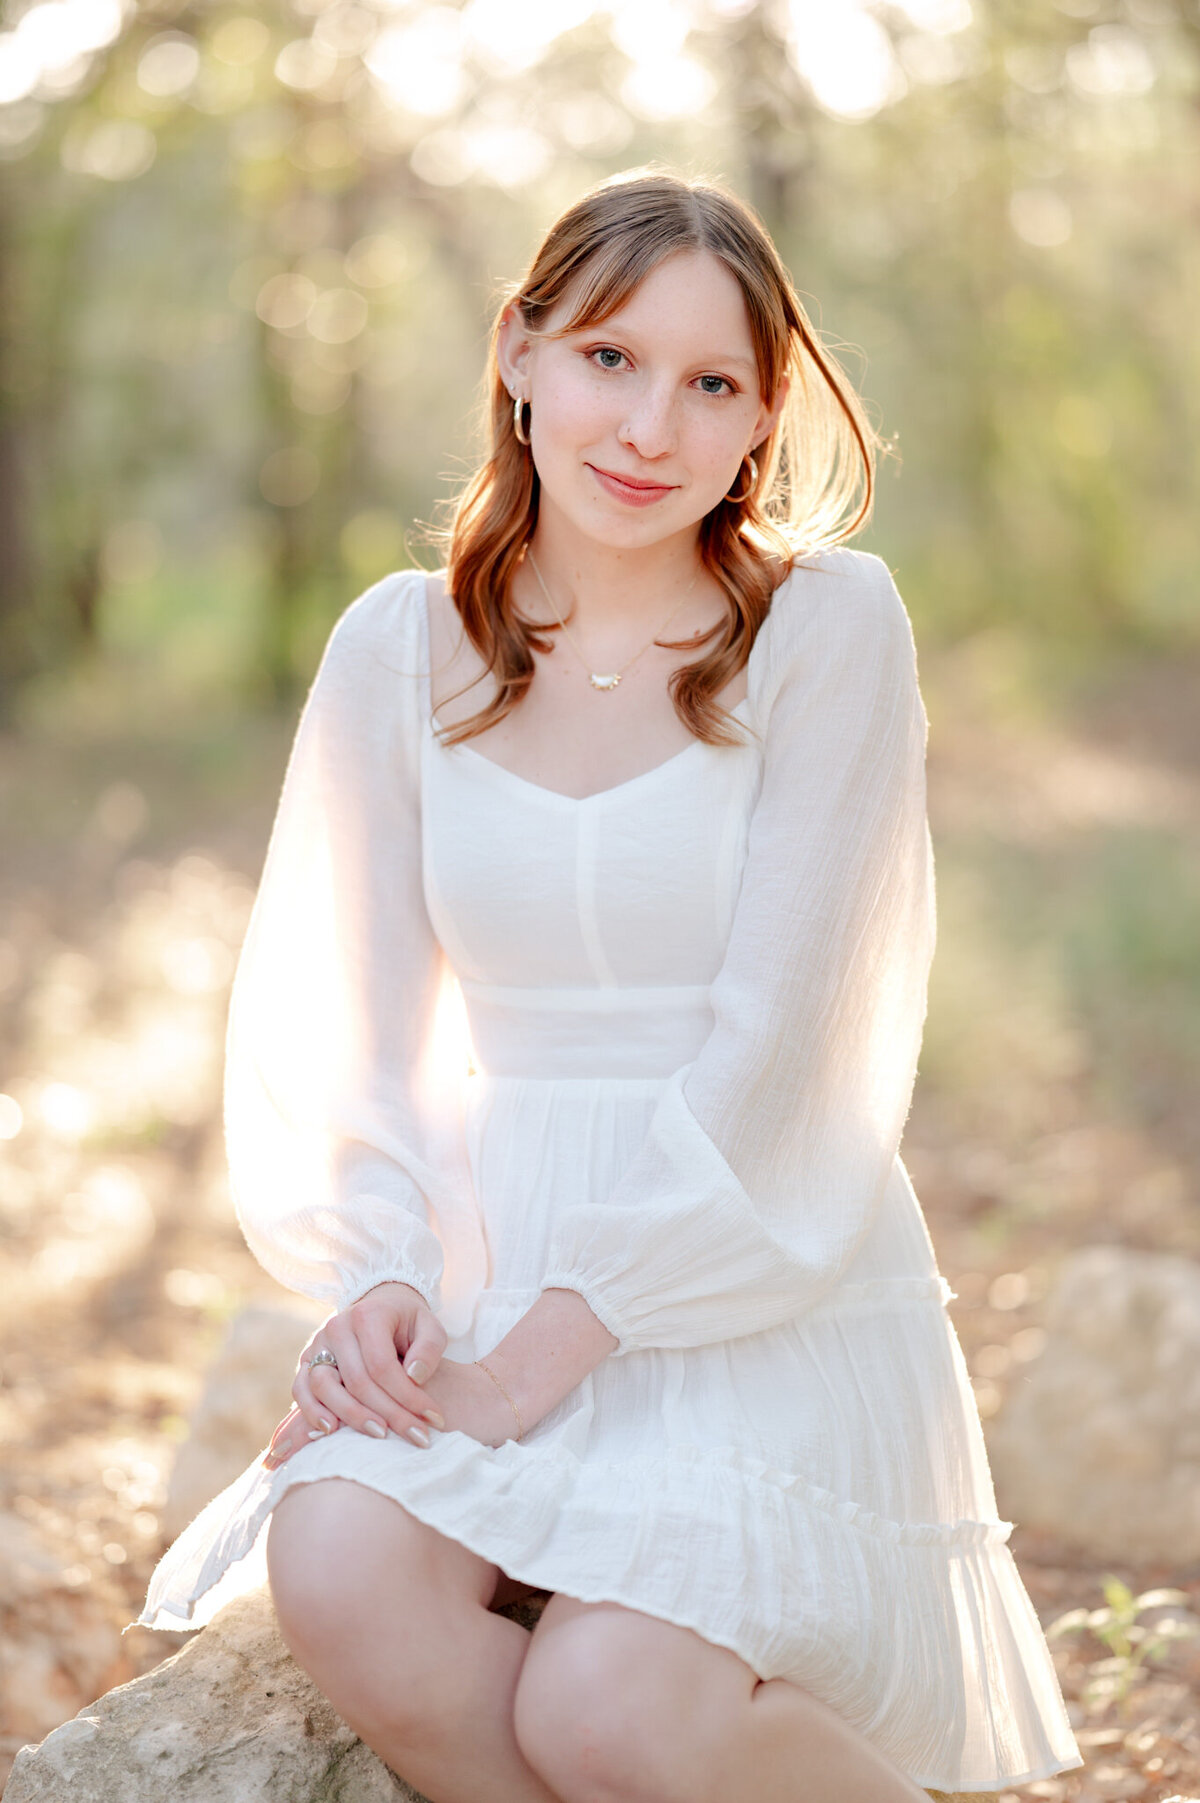 Senior picture of a redhead in a white dress and glowing backlight.